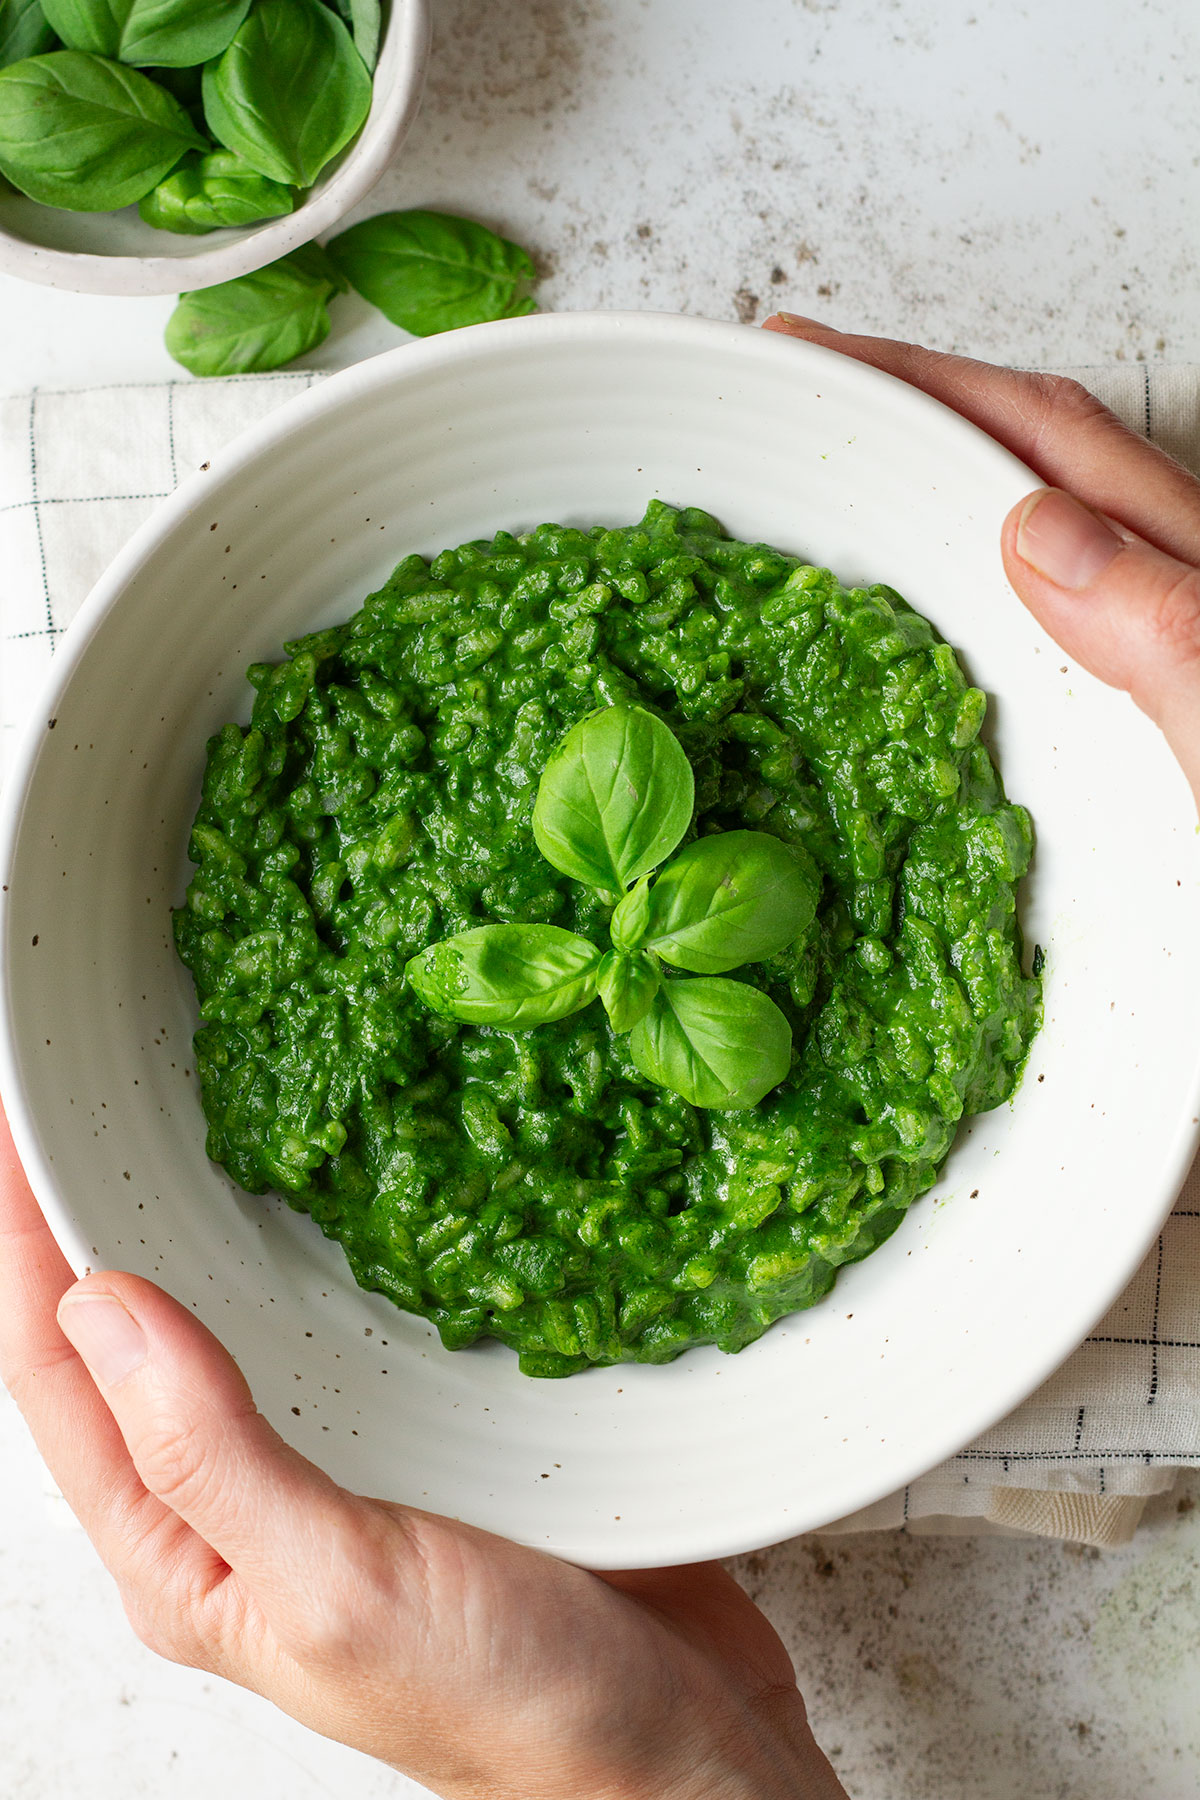 Risotto Verde with a basil garnish served in a white bowl.